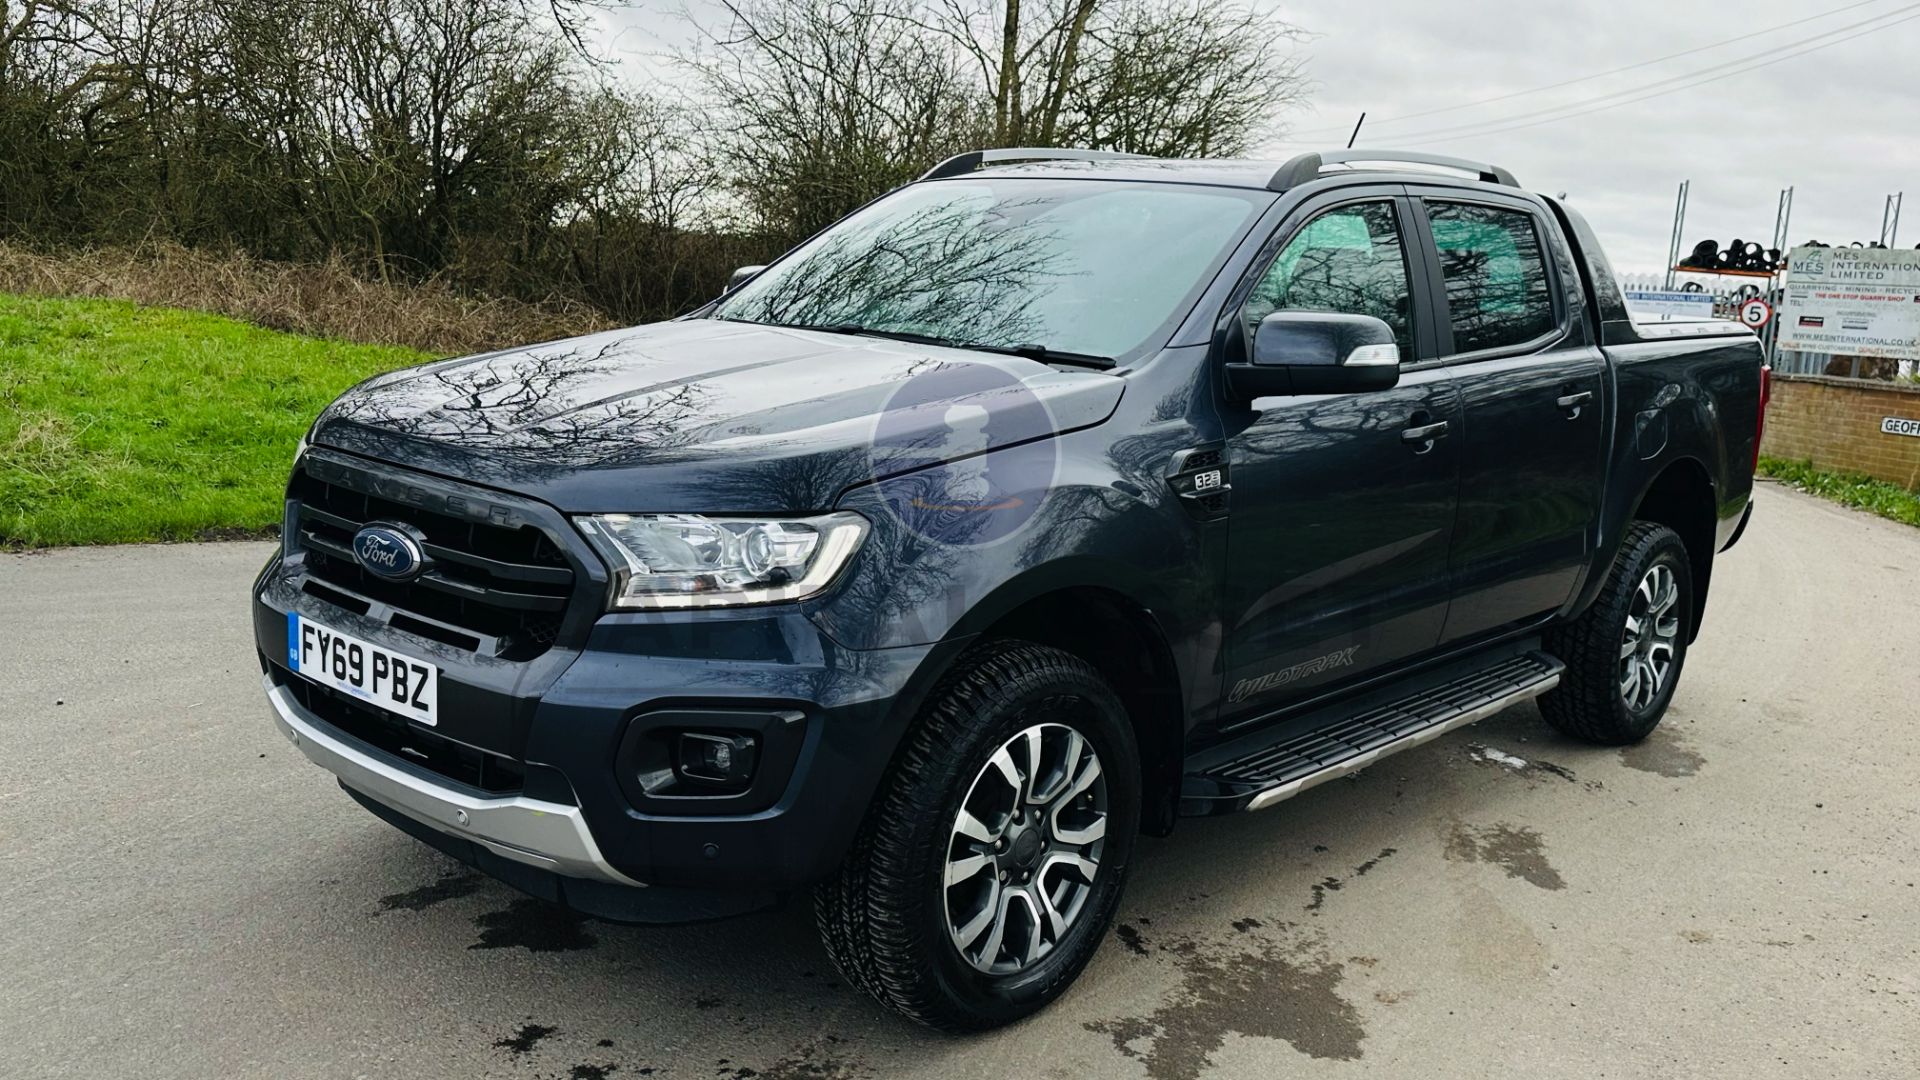 (On Sale) FORD RANGER *WILDTRAK EDITION* DOUBLE CAB PICK-UP (69 REG - EURO 6) 3.2 TDCI - AUTOMATIC - Image 5 of 49